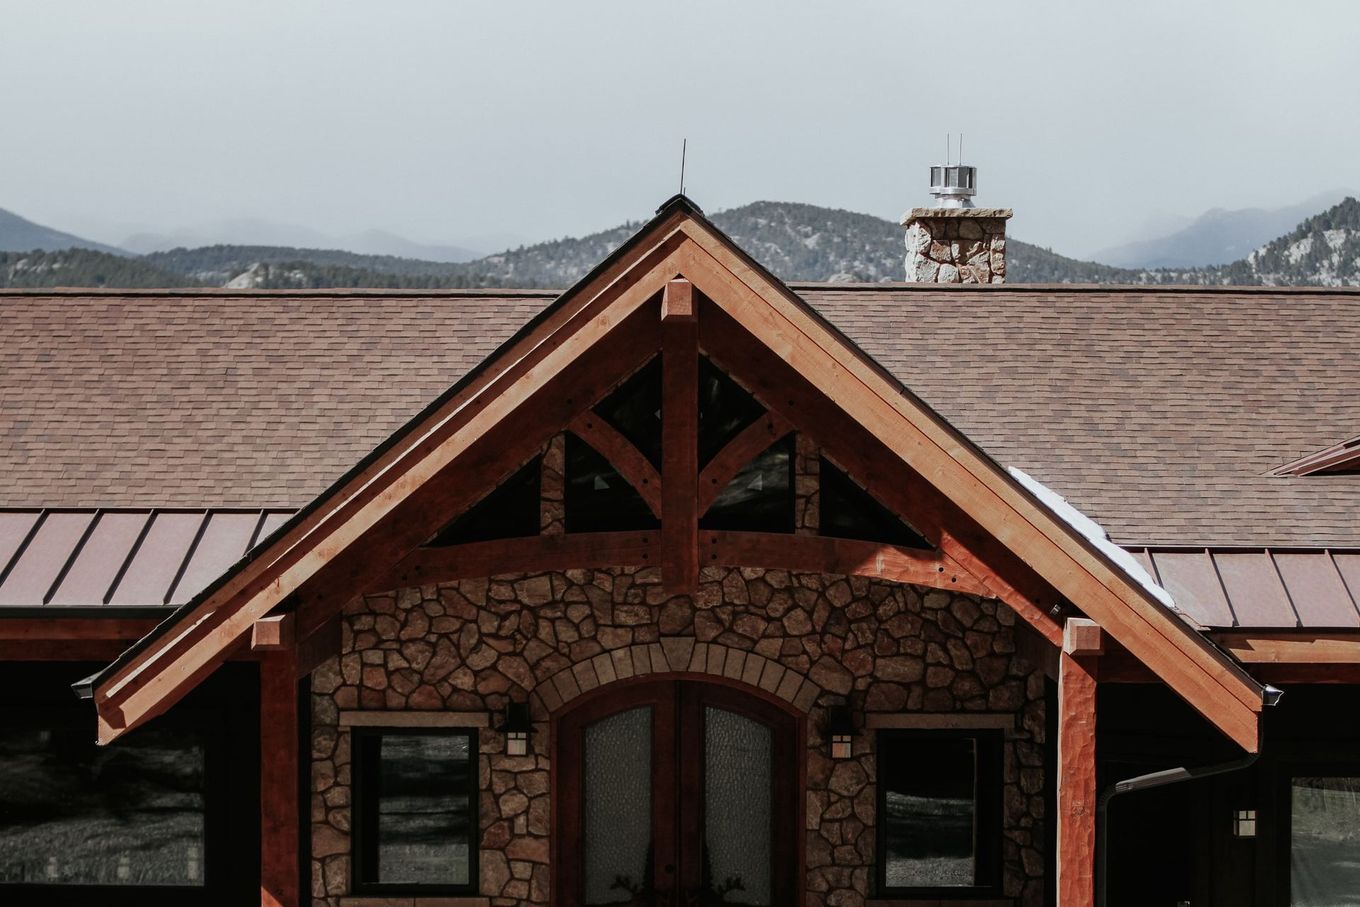 A large stone house with a wooden roof and mountains in the background.